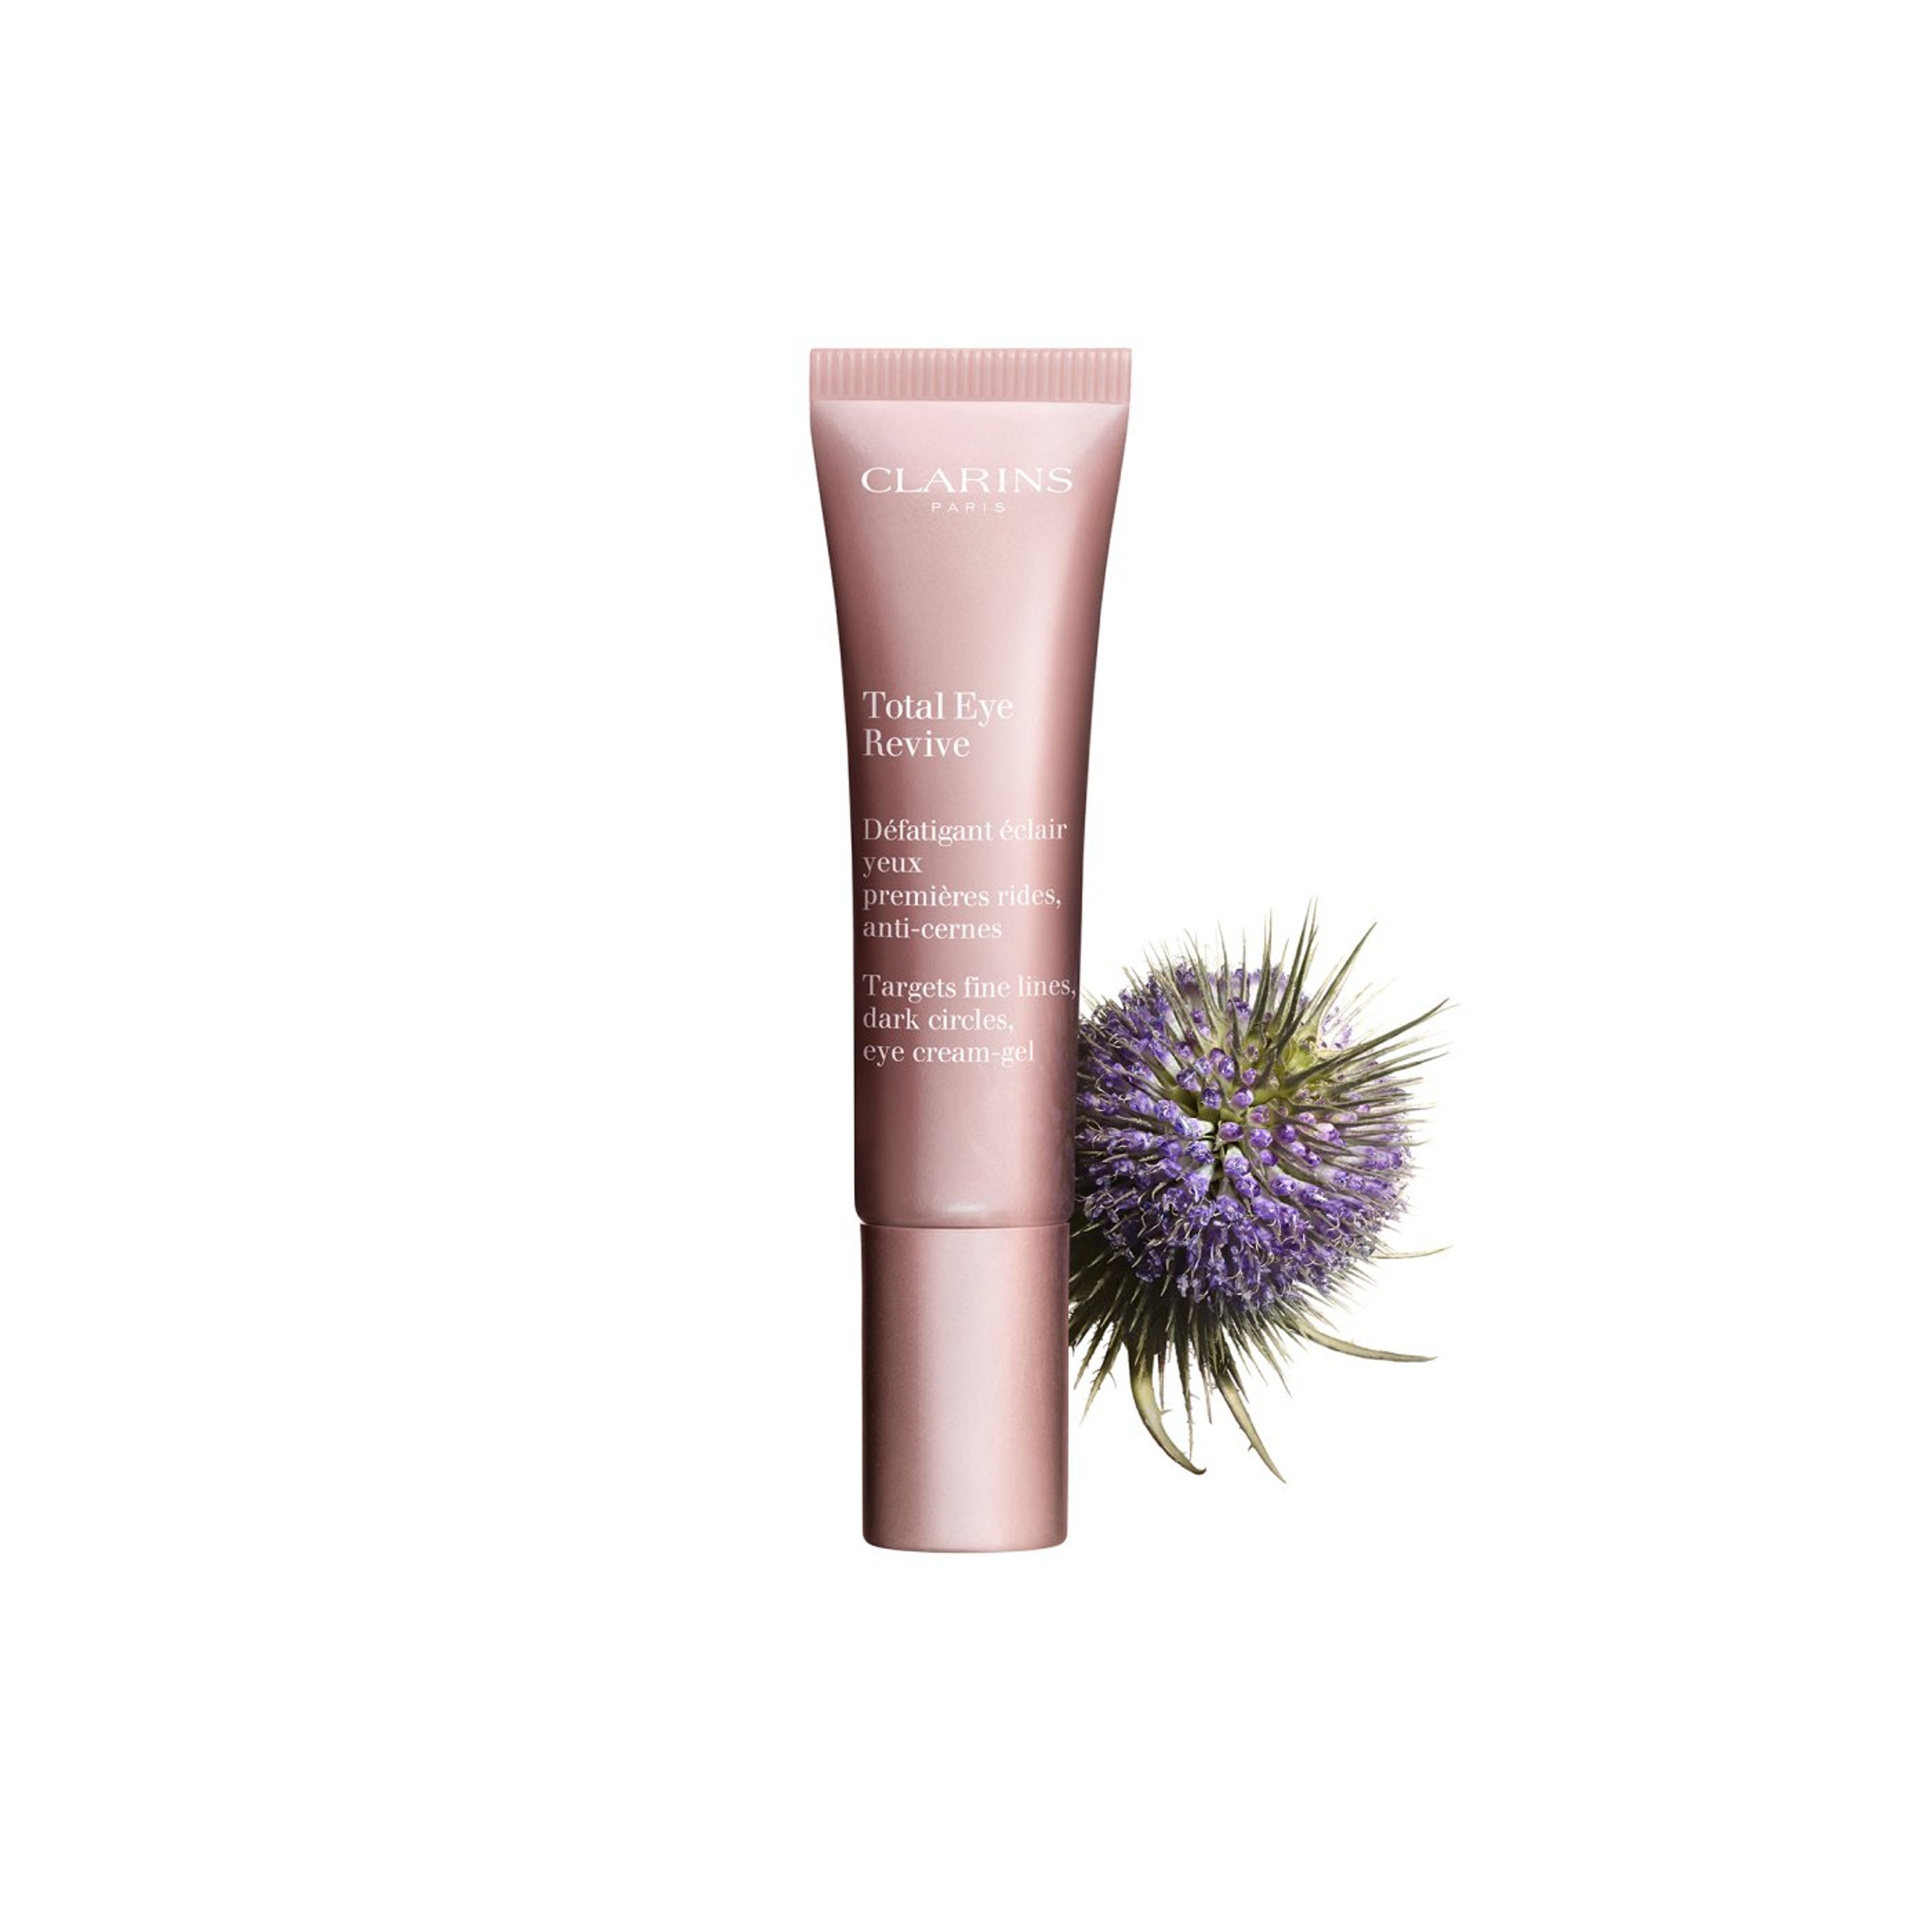 Clarins Total Eye Revive 1